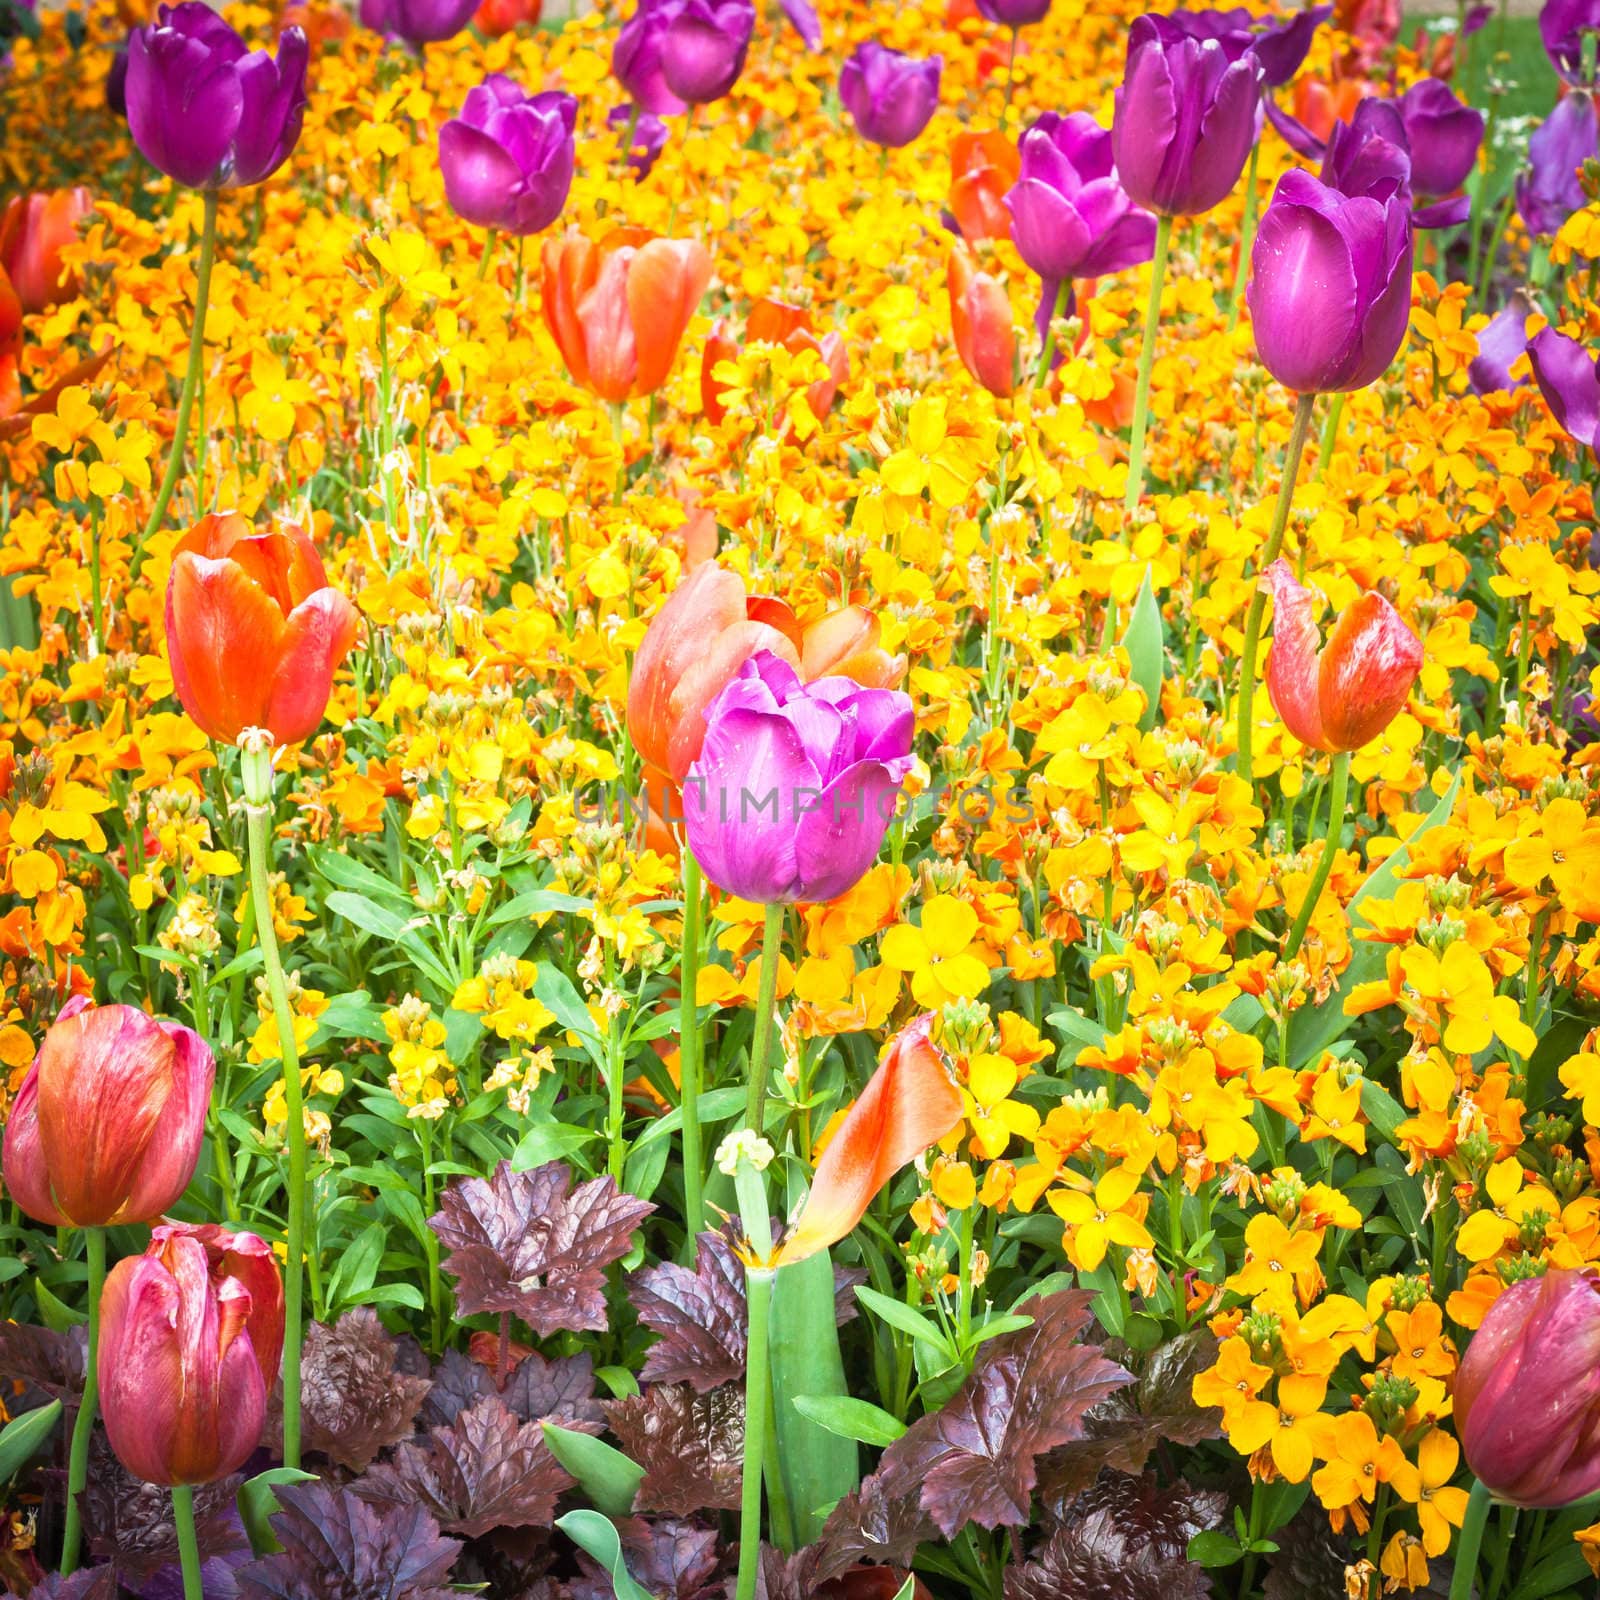 Colorful display of tuplips and pansies in a garden